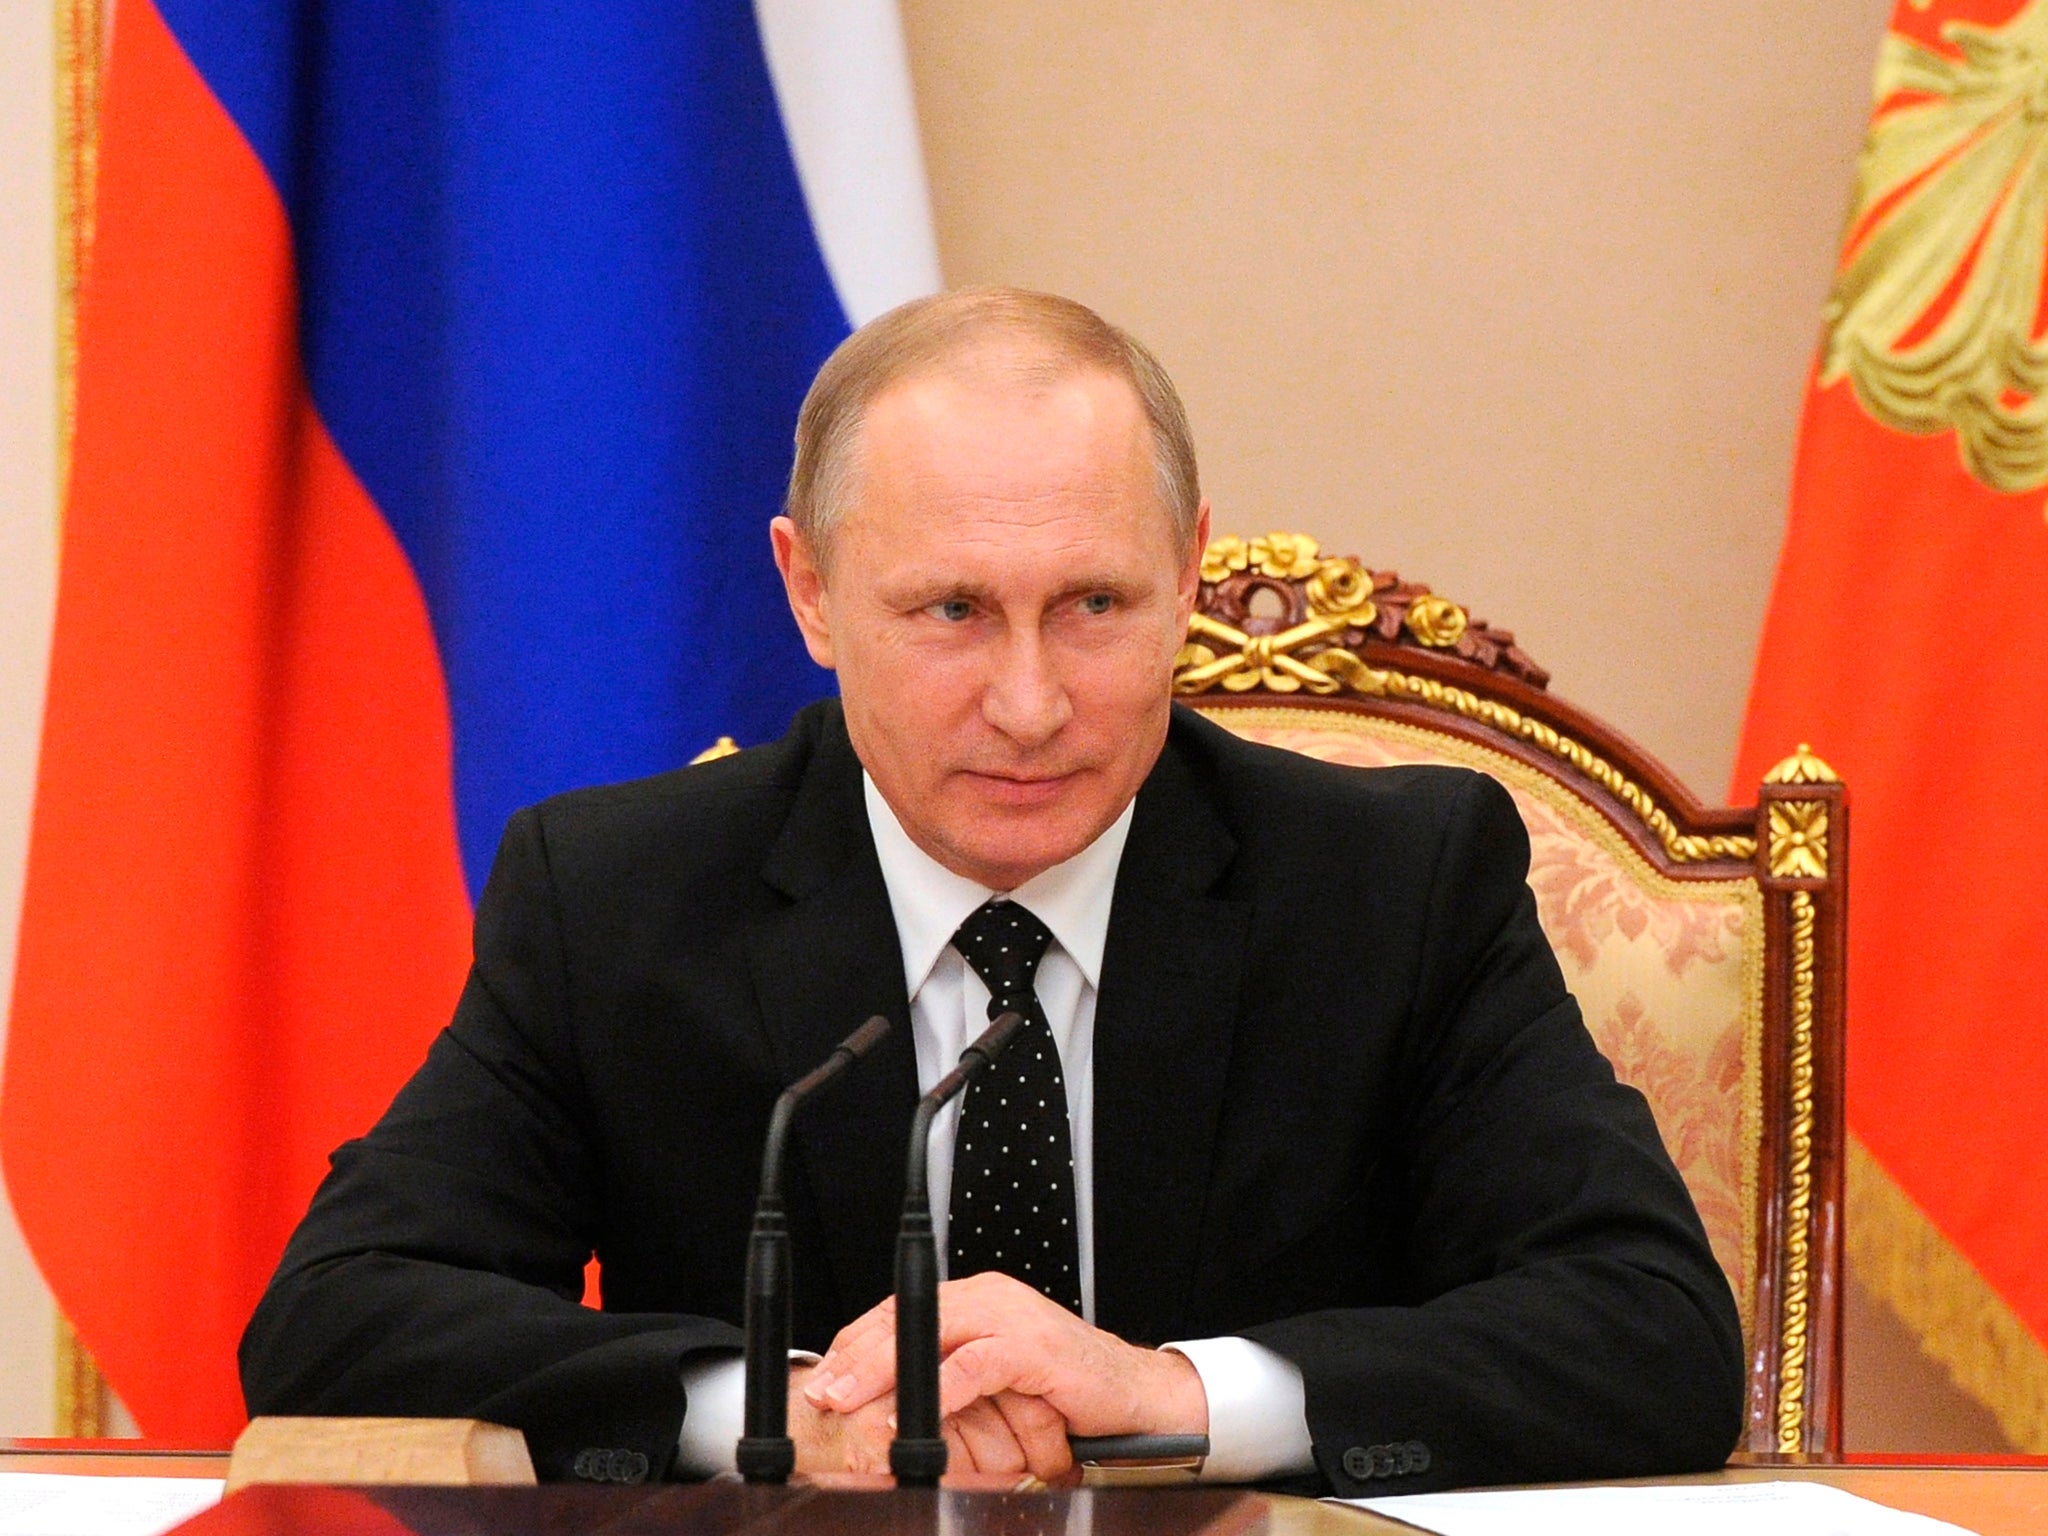 Vladimir Putin has warned that deaths in the Crimea of Russian servicemen will not be ignored